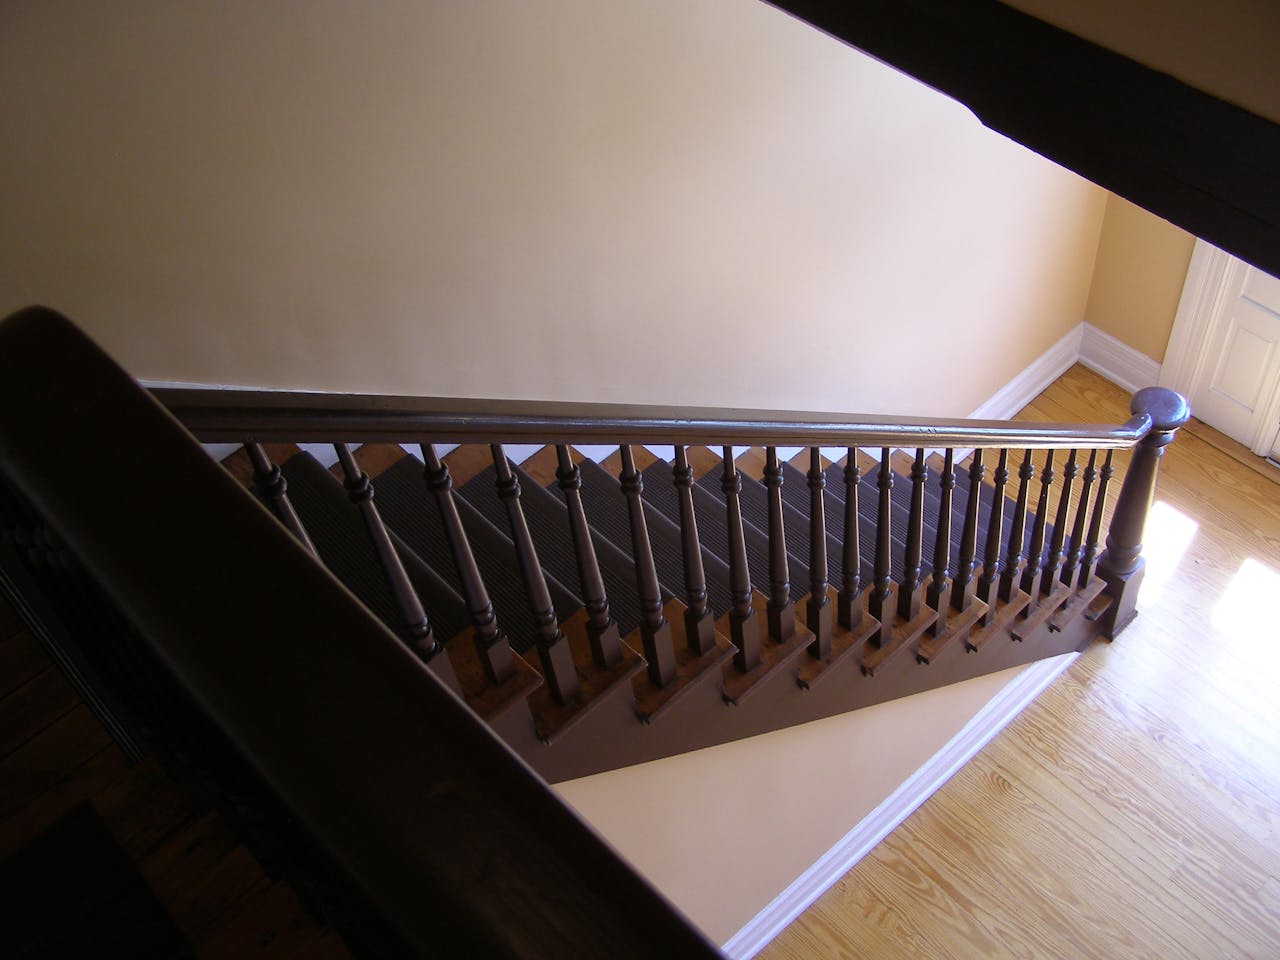 Why do some stairs have angled risers?